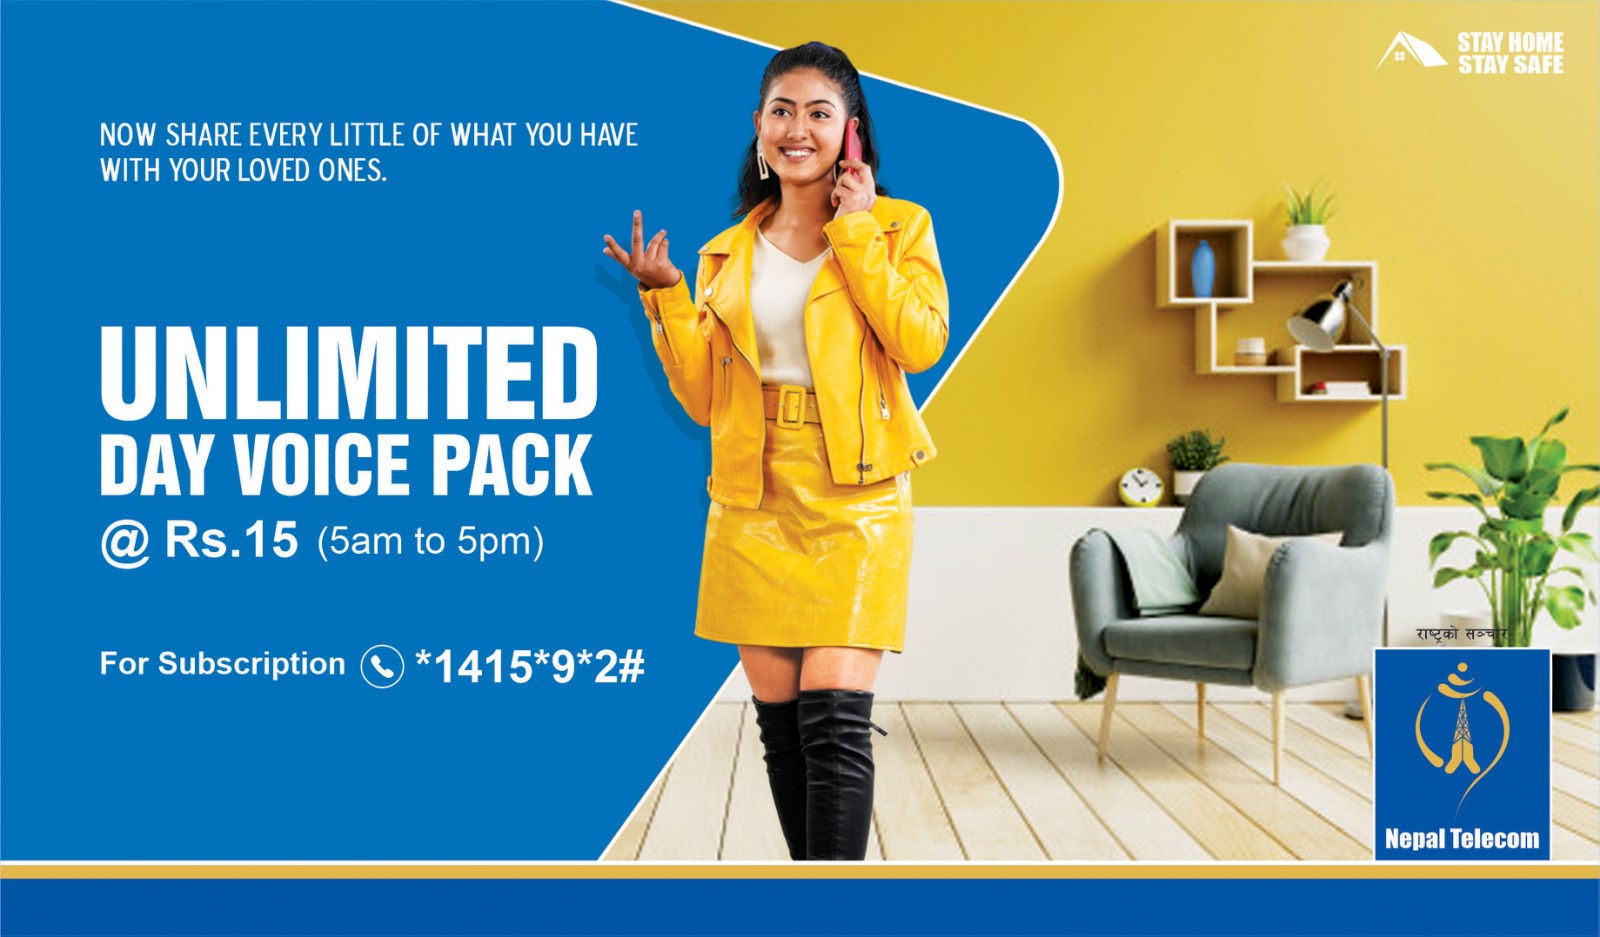 NTC Unlimited Day Voice Pack Only at Rs.15